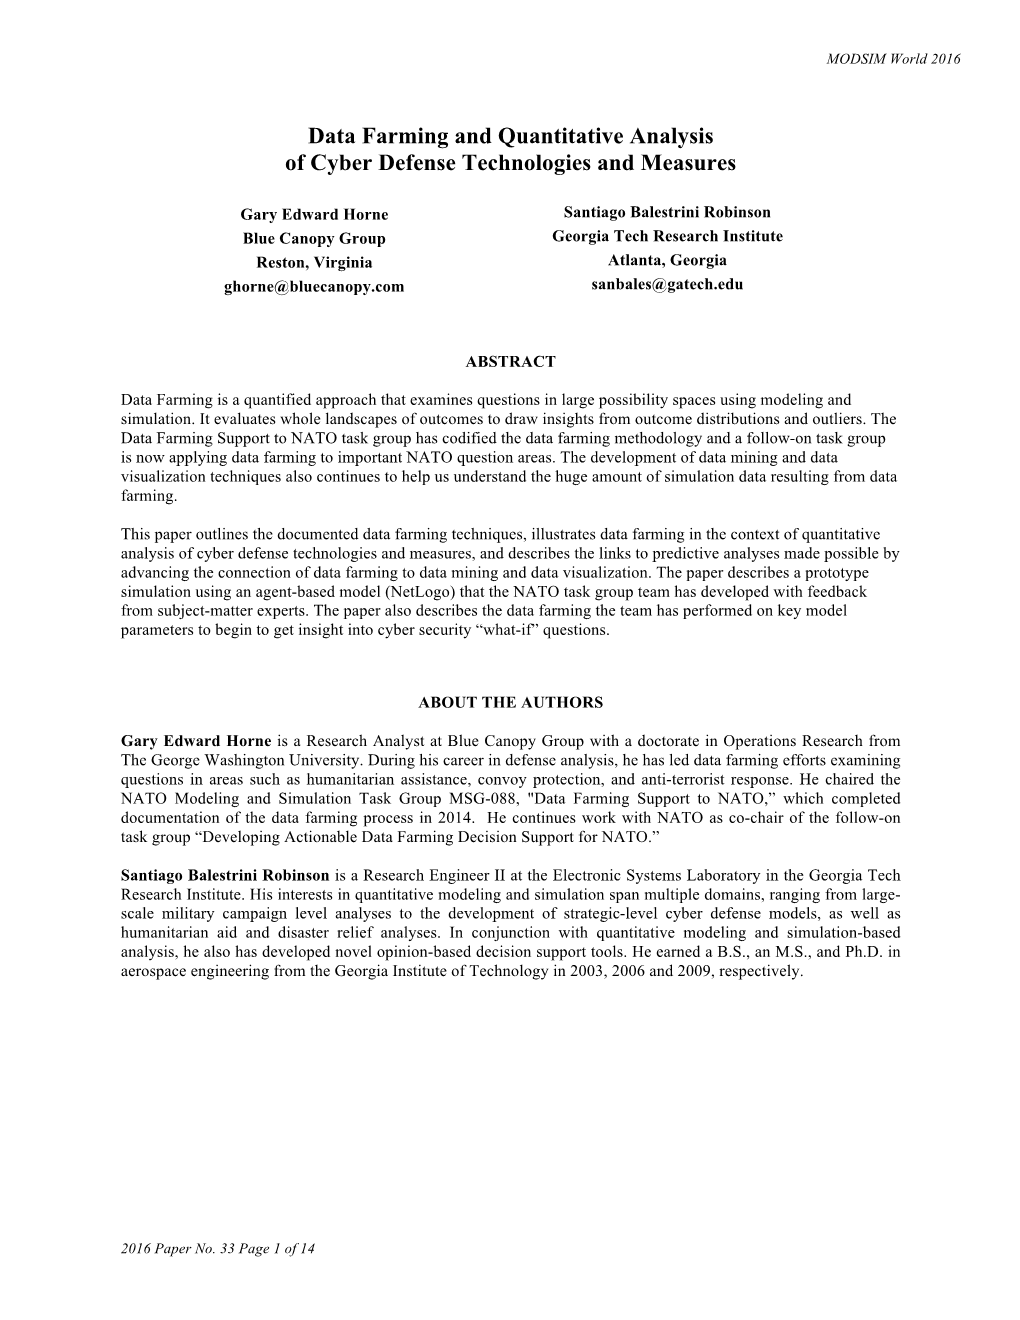 Data Farming and Quantitative Analysis of Cyber Defense Technologies and Measures